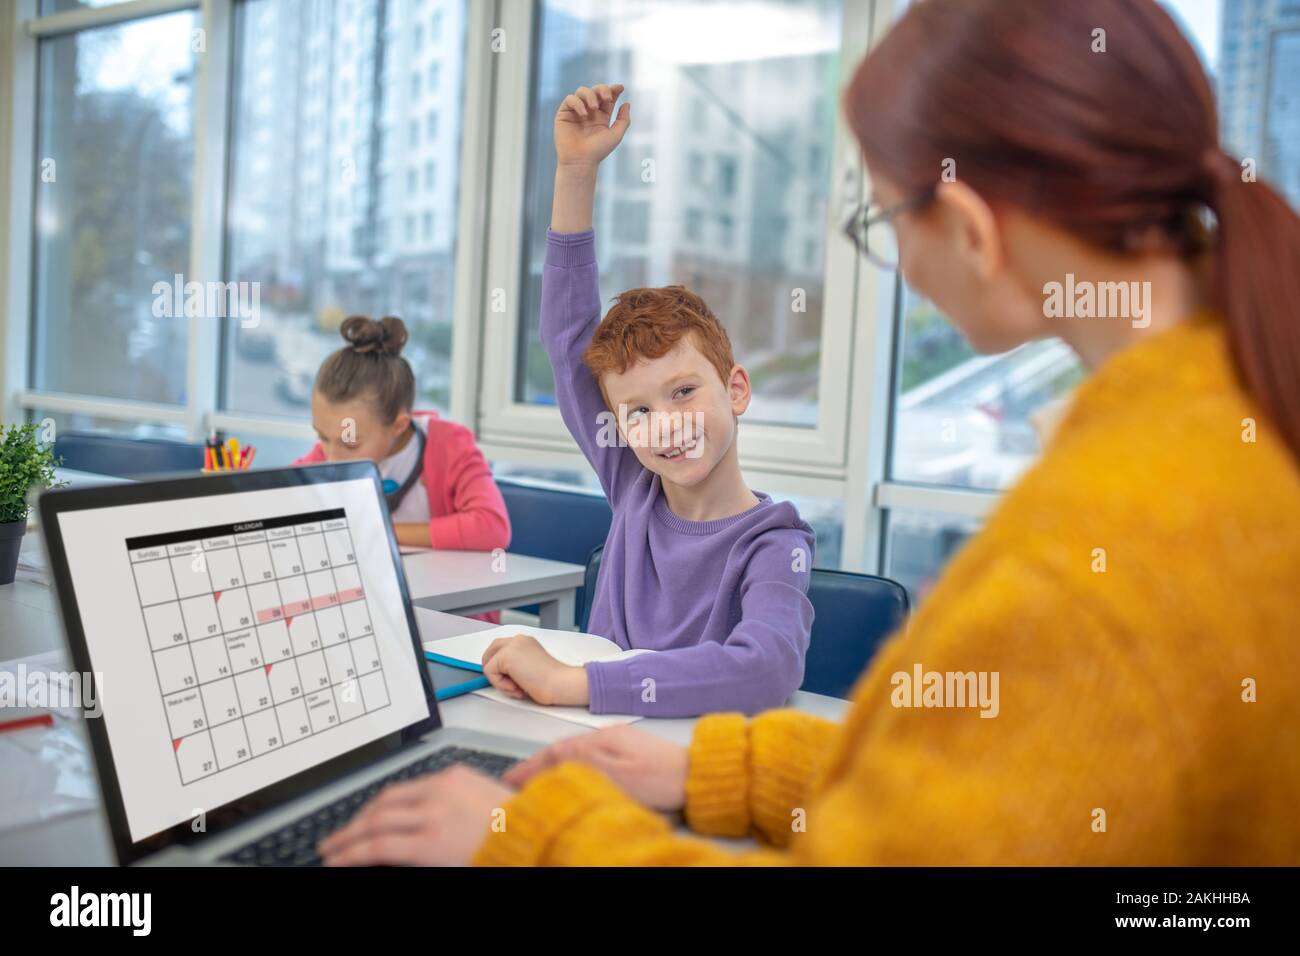 Schoolboy raising a hand to answer teachers question Stock Photo